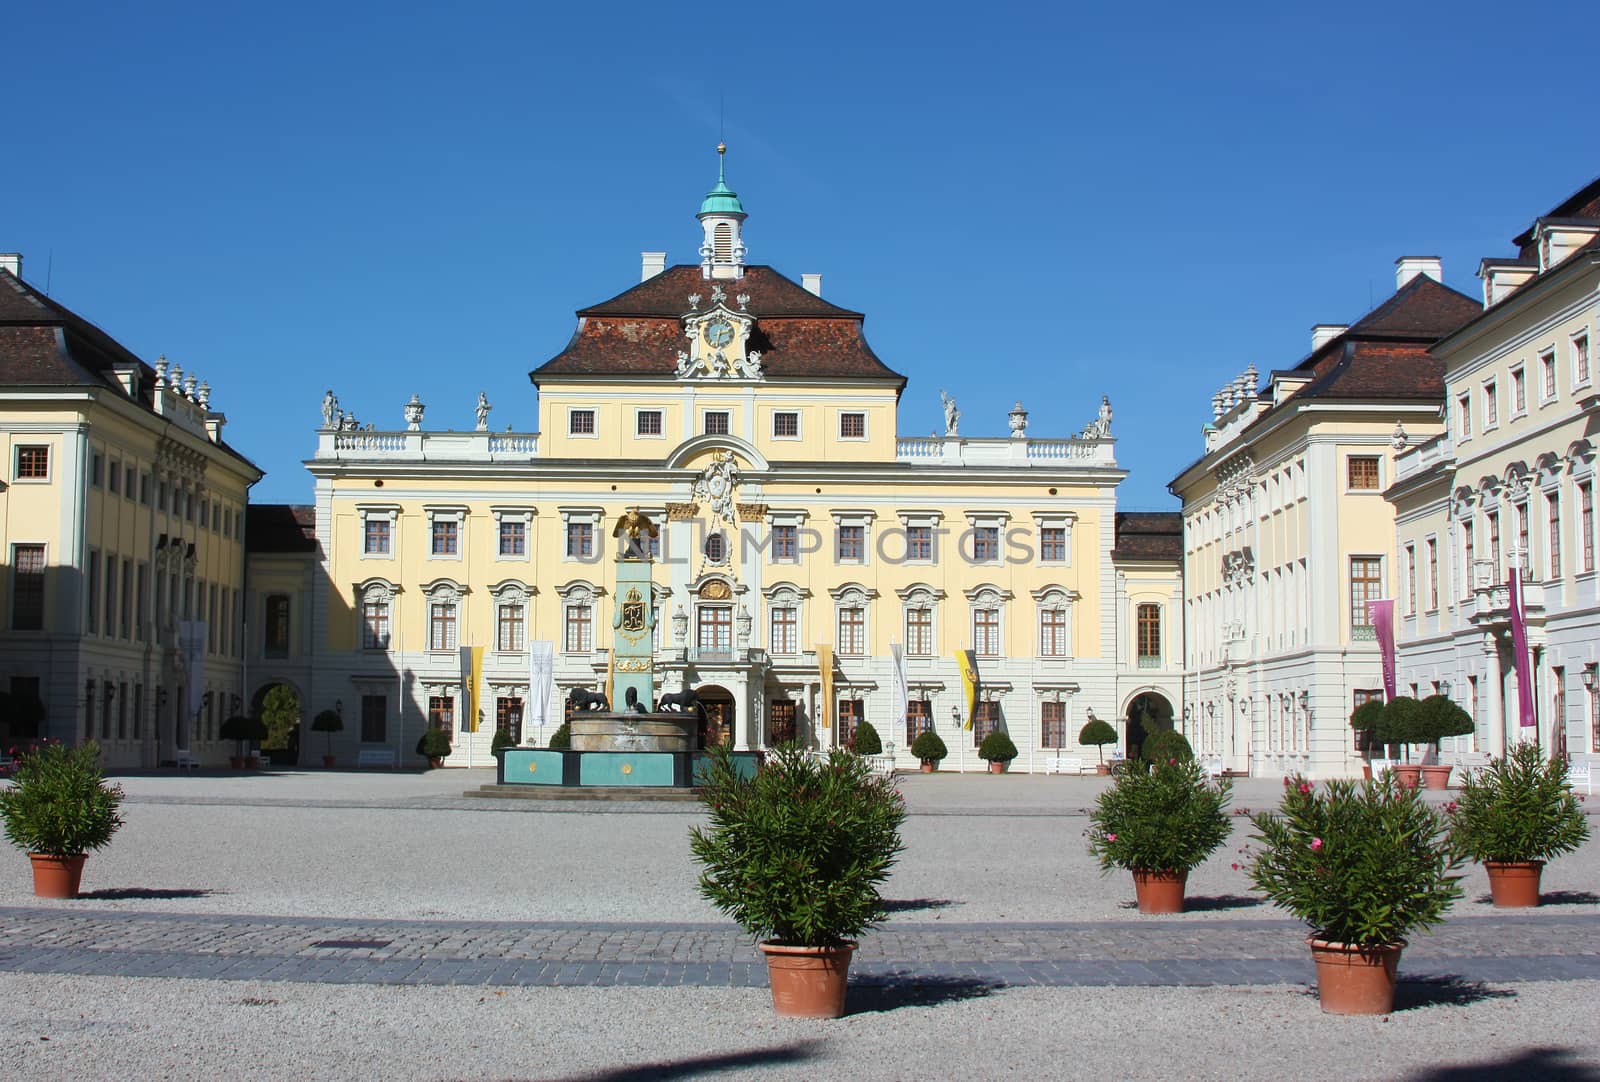 Situated near Stuttgart and known as the “Versailles of Swabia”, Ludwigsburg was founded in 1704 on the initiative of Eberhard Ludwig, Duke of Wurttemberg. At the heart of the town is the vast palace complex, which the Duke ordered to be built for his mistress, Countess Wilhelmina von Graevenitz
